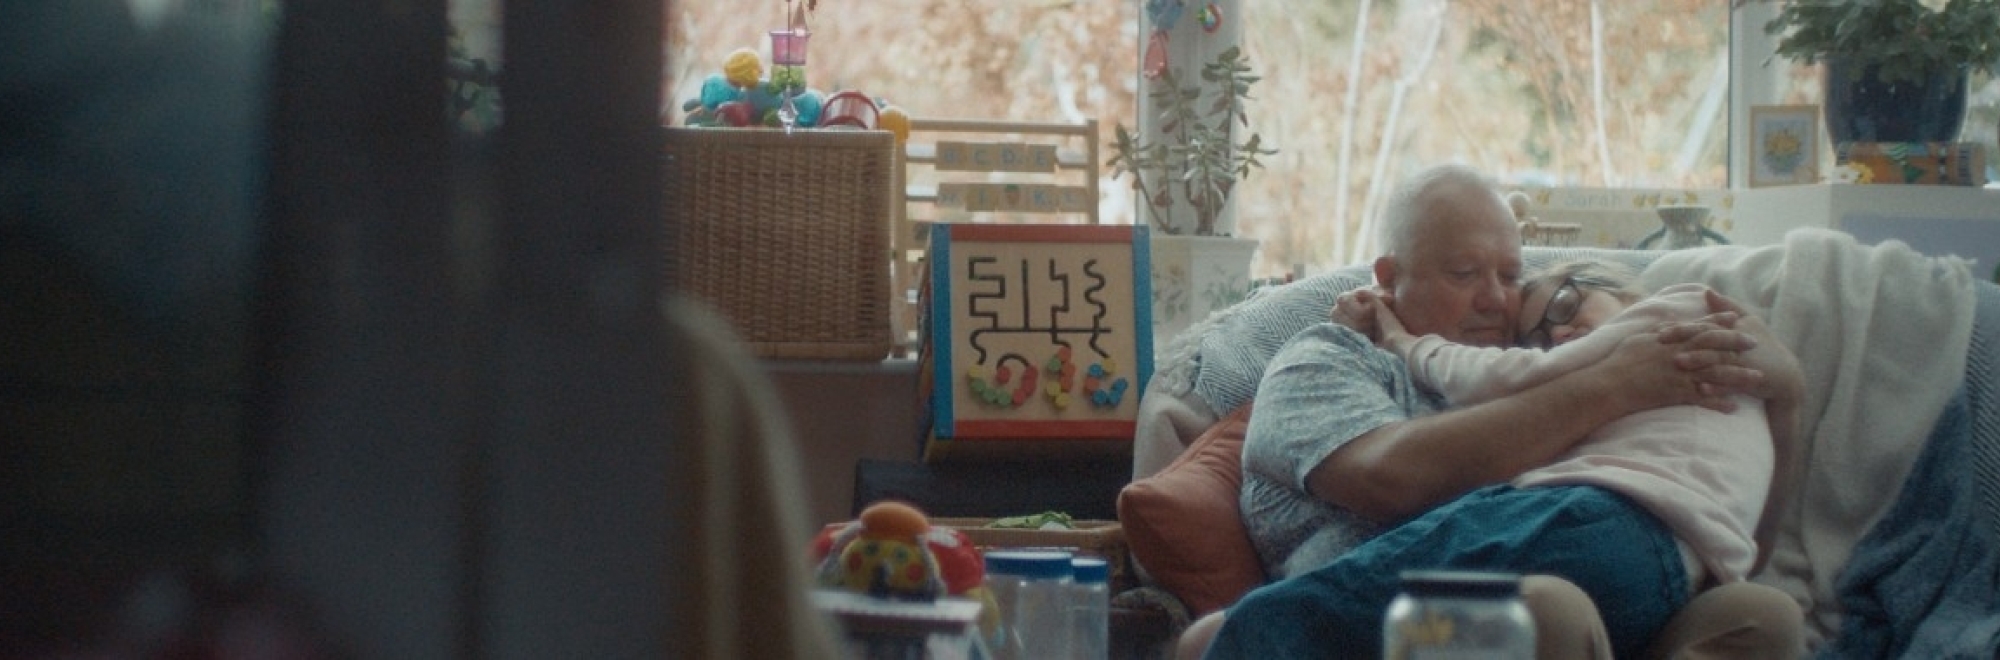 TENA goes behind closed doors to show the unseen reality of family carers in powerful global campaign